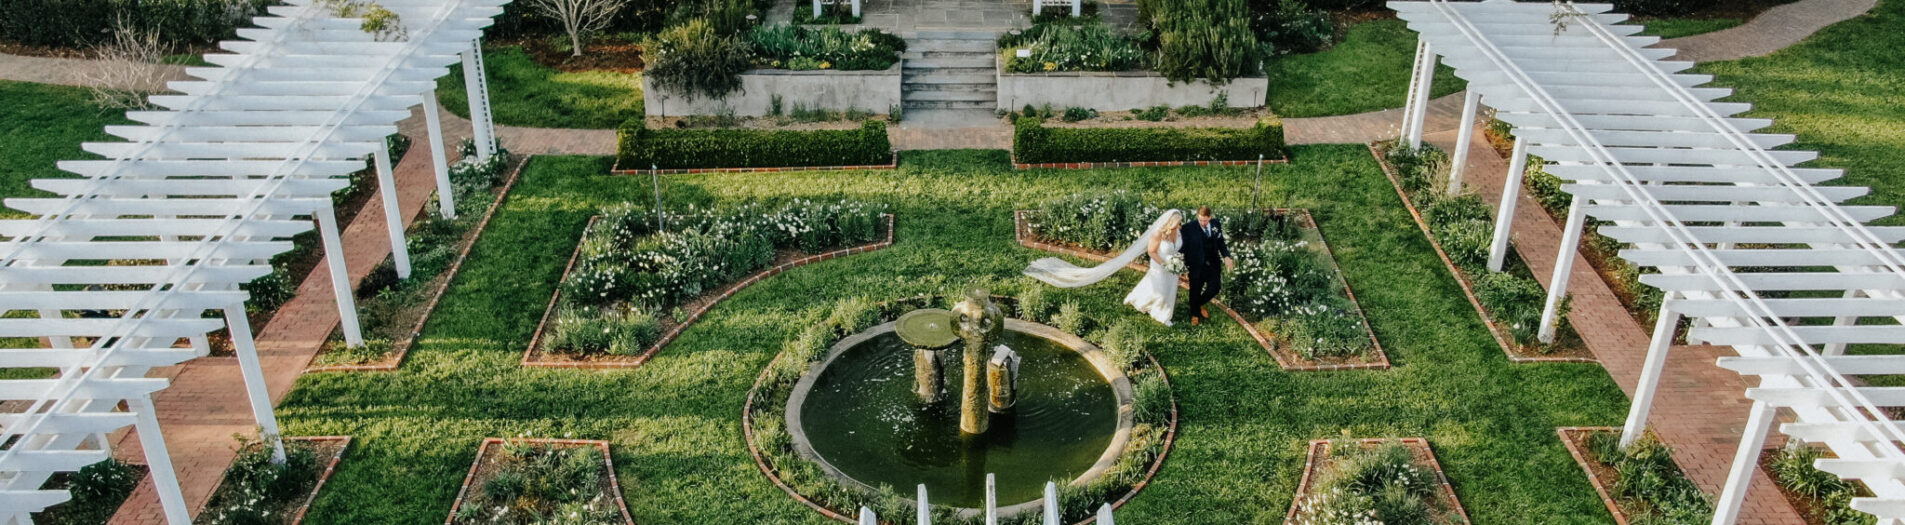 Heavenly Drone Wedding Videography + Photography Add-On | Michelle Elyse Photography x Falla the Drone Operator Collaborative